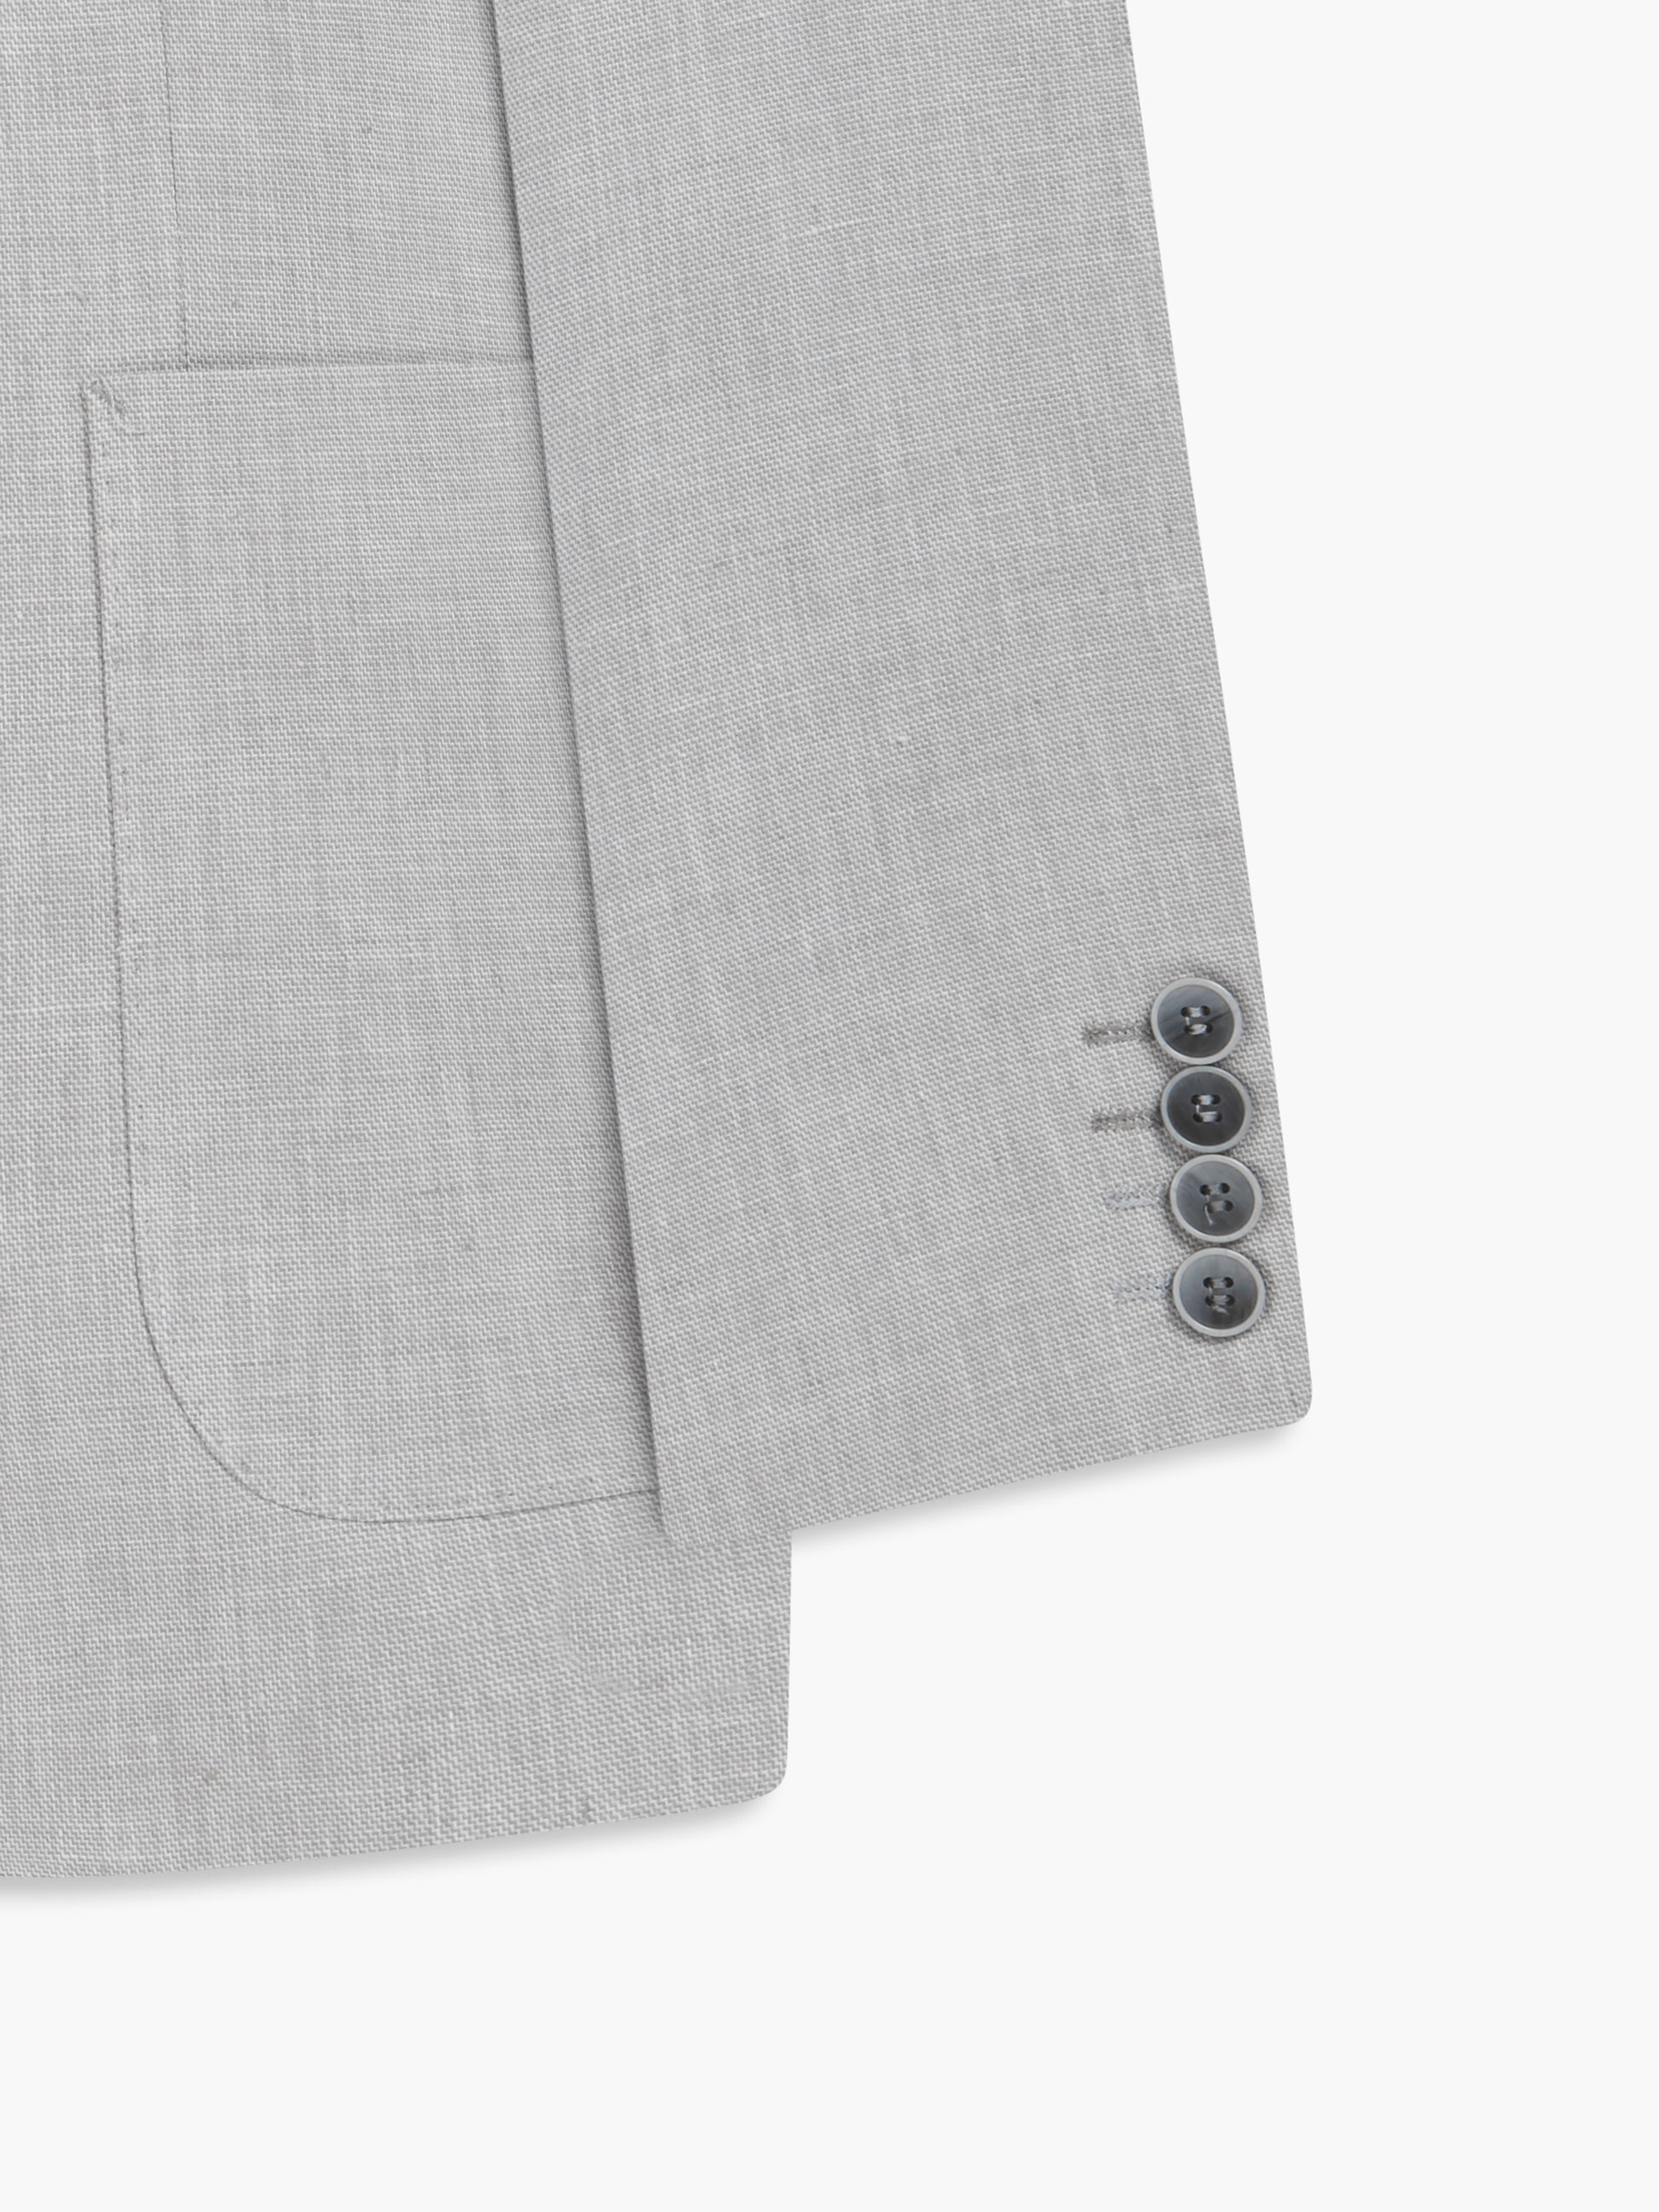 Image 9 of Slim Fit Single Breasted Linen Suit Jacket in Light Grey